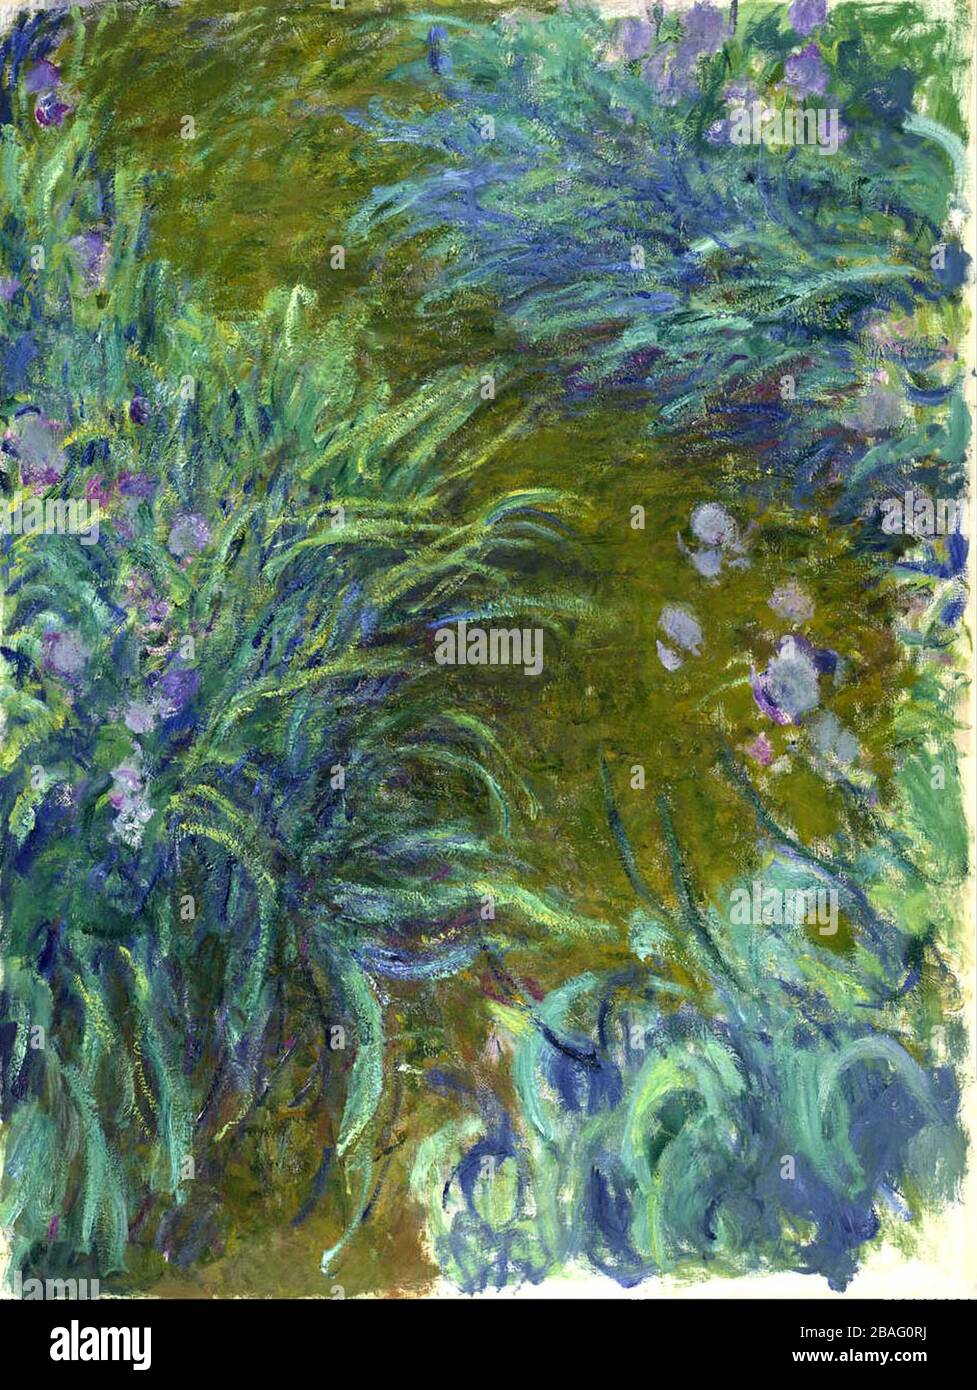 painting, monet, art, france, impressionism, claude monet, impressionist, artist, travel, nature, water, flower, painter, summer, green, garden, landscape, artwork, paint, beautiful, french, lily, plant, house, scenic, tourist, pond, abstract, claude, color, old, boat, giverny, holidays, le havre, picture, artistic, background, flowers, tourist attraction, famous, season, sketch, floral, home, beach, bloom, brush, design, illustration Stock Photo